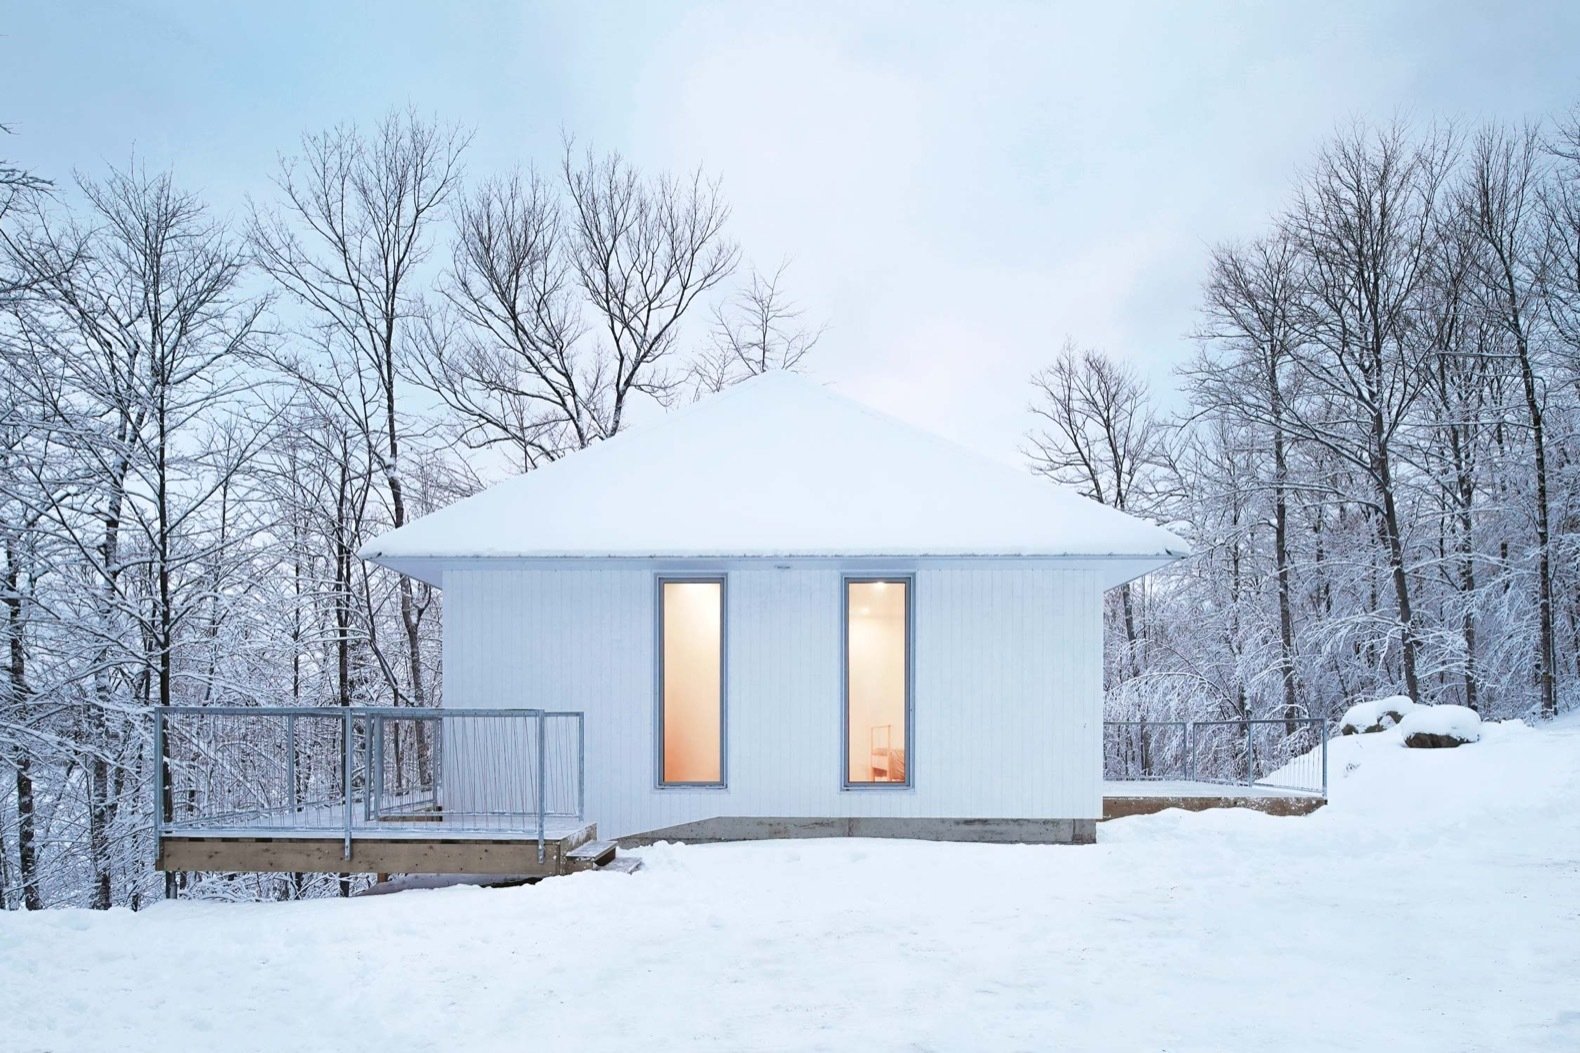 This Snow-White Cabin Disappears Into a Wintry Lakeside